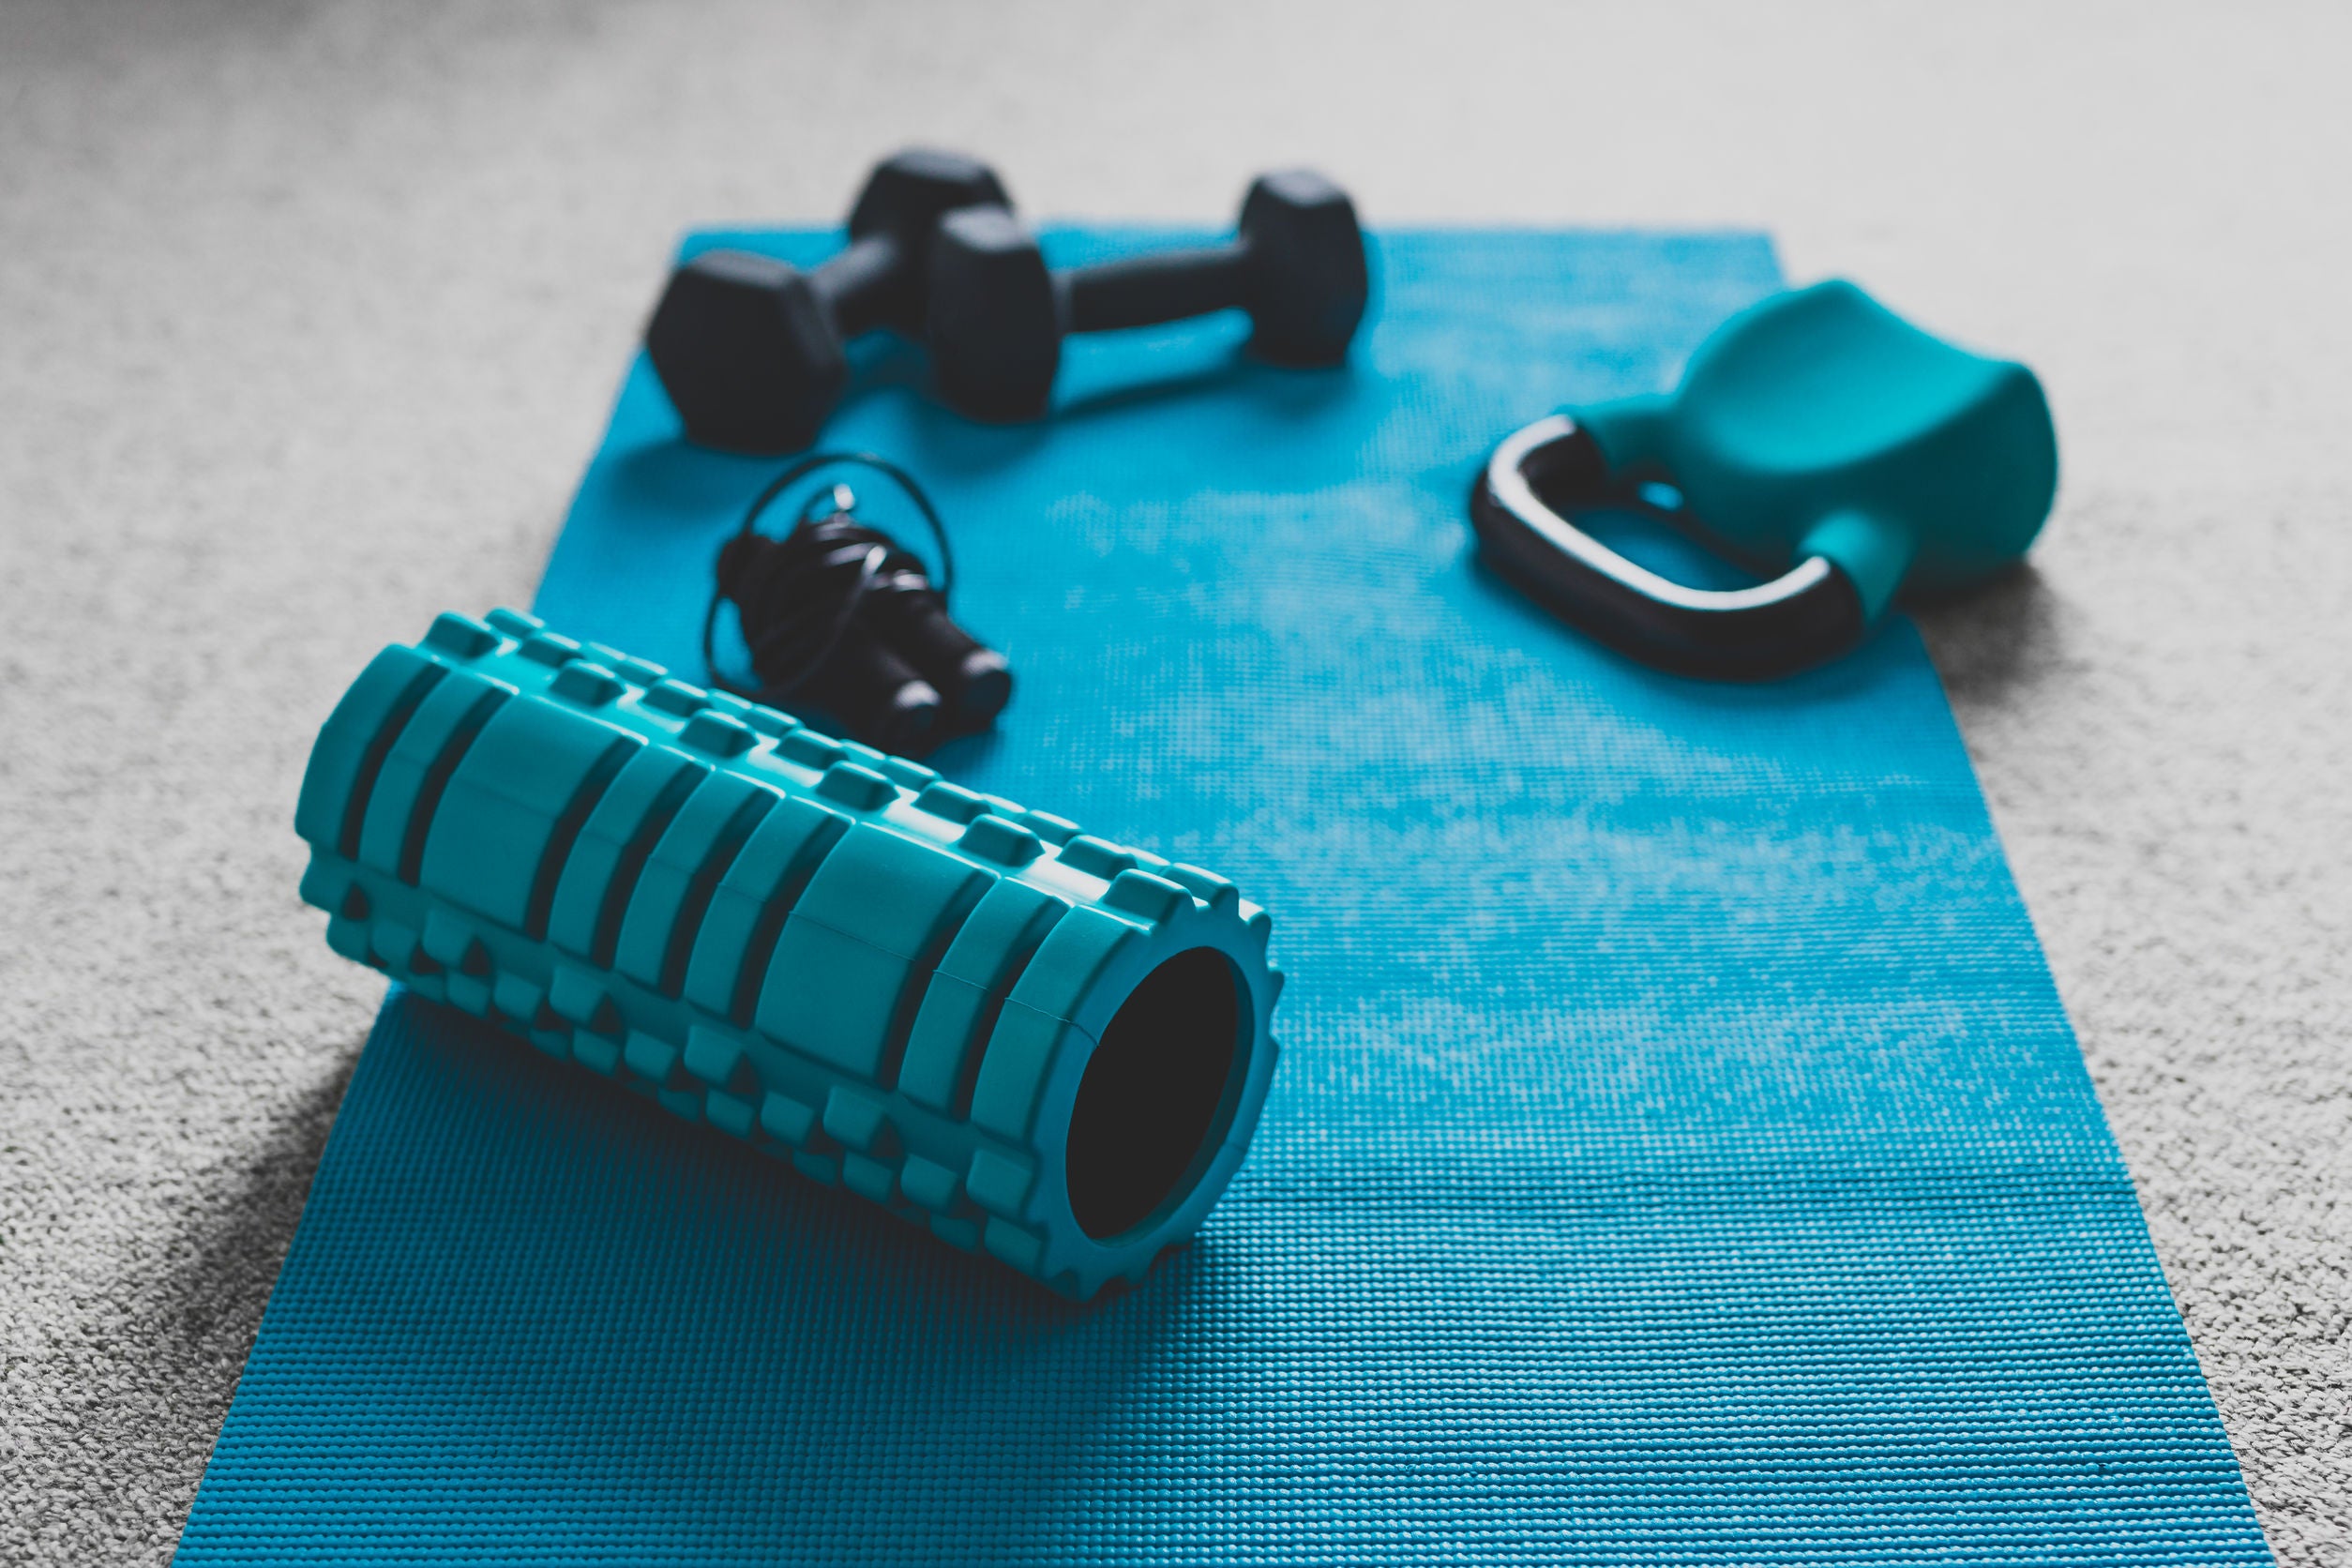 Best Foam Roller Exercises to Ease Tension in Your Body And Promote Healing